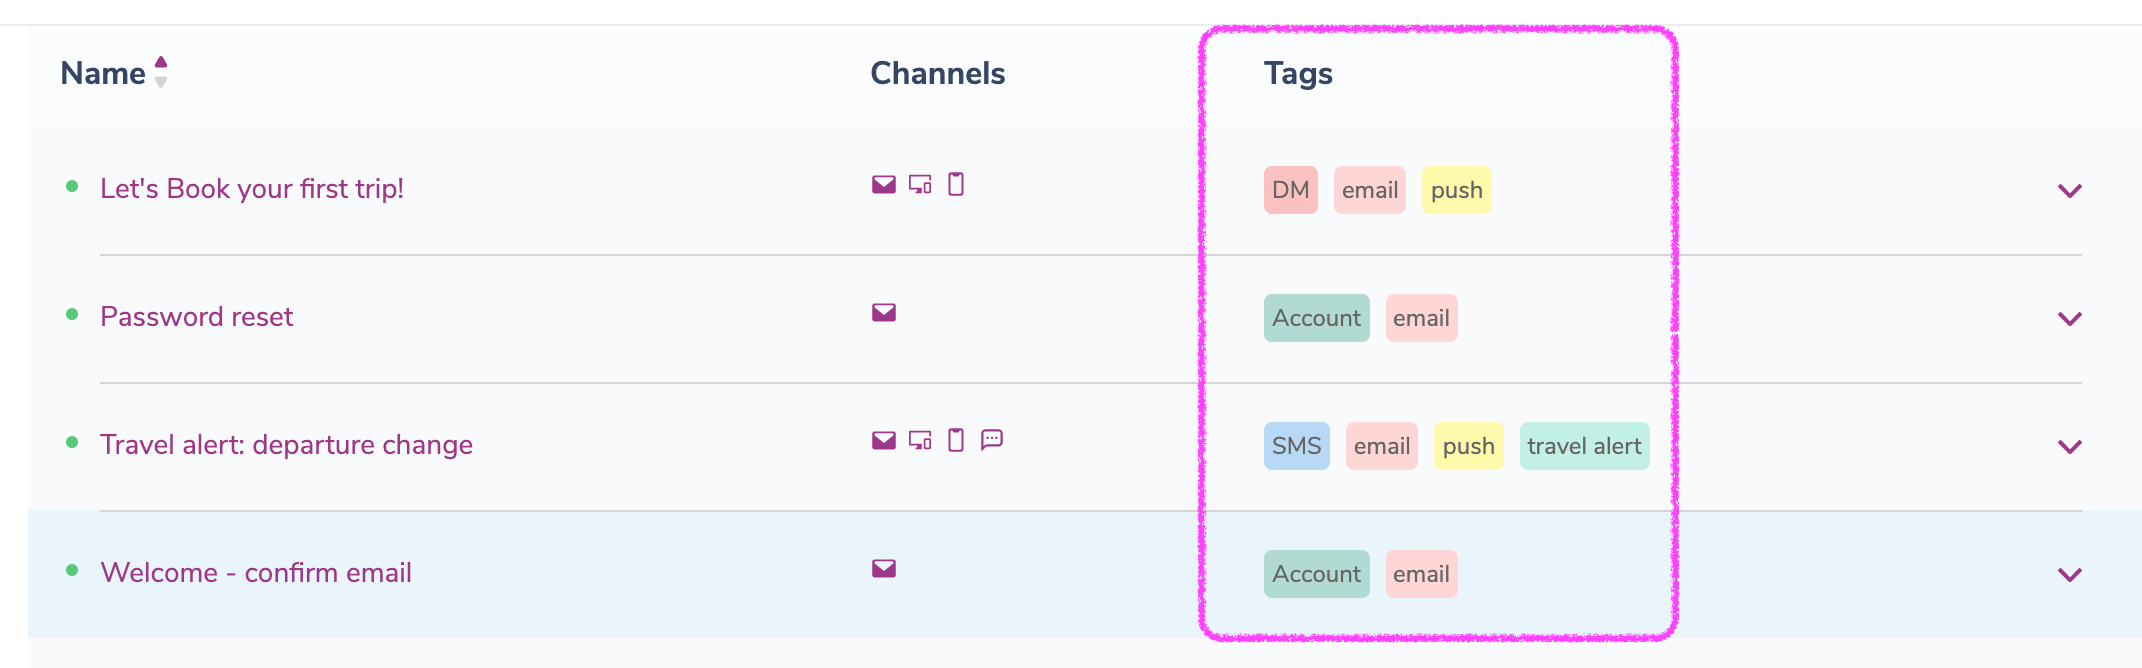 Notification Tags Overview